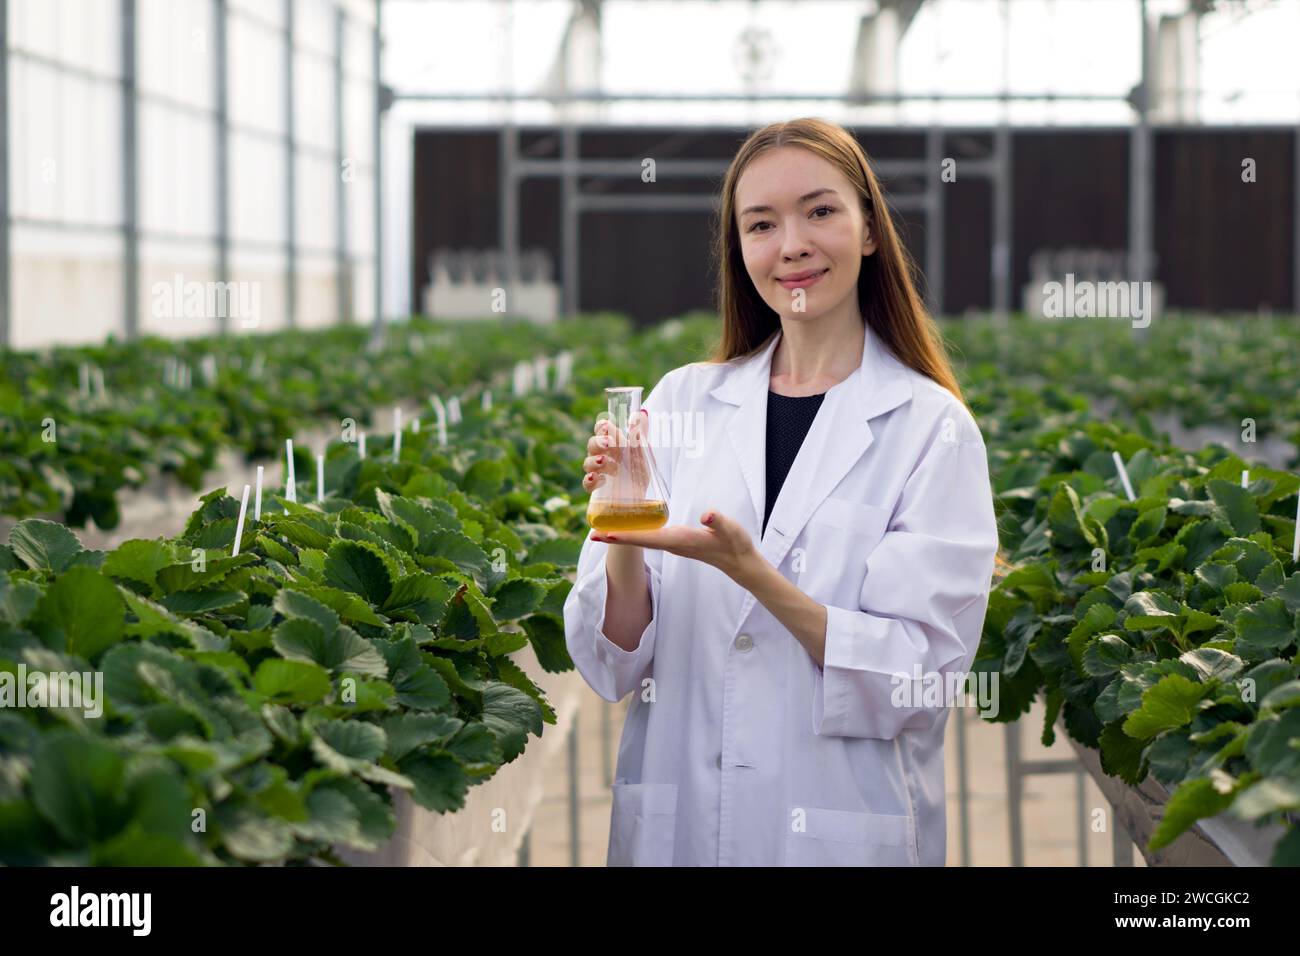 Scientific Expertise. Caucasian female botanical scientist in white gown holding Erlenmeyer flask with yellow chemical while working in indoor strawbe Stock Photo